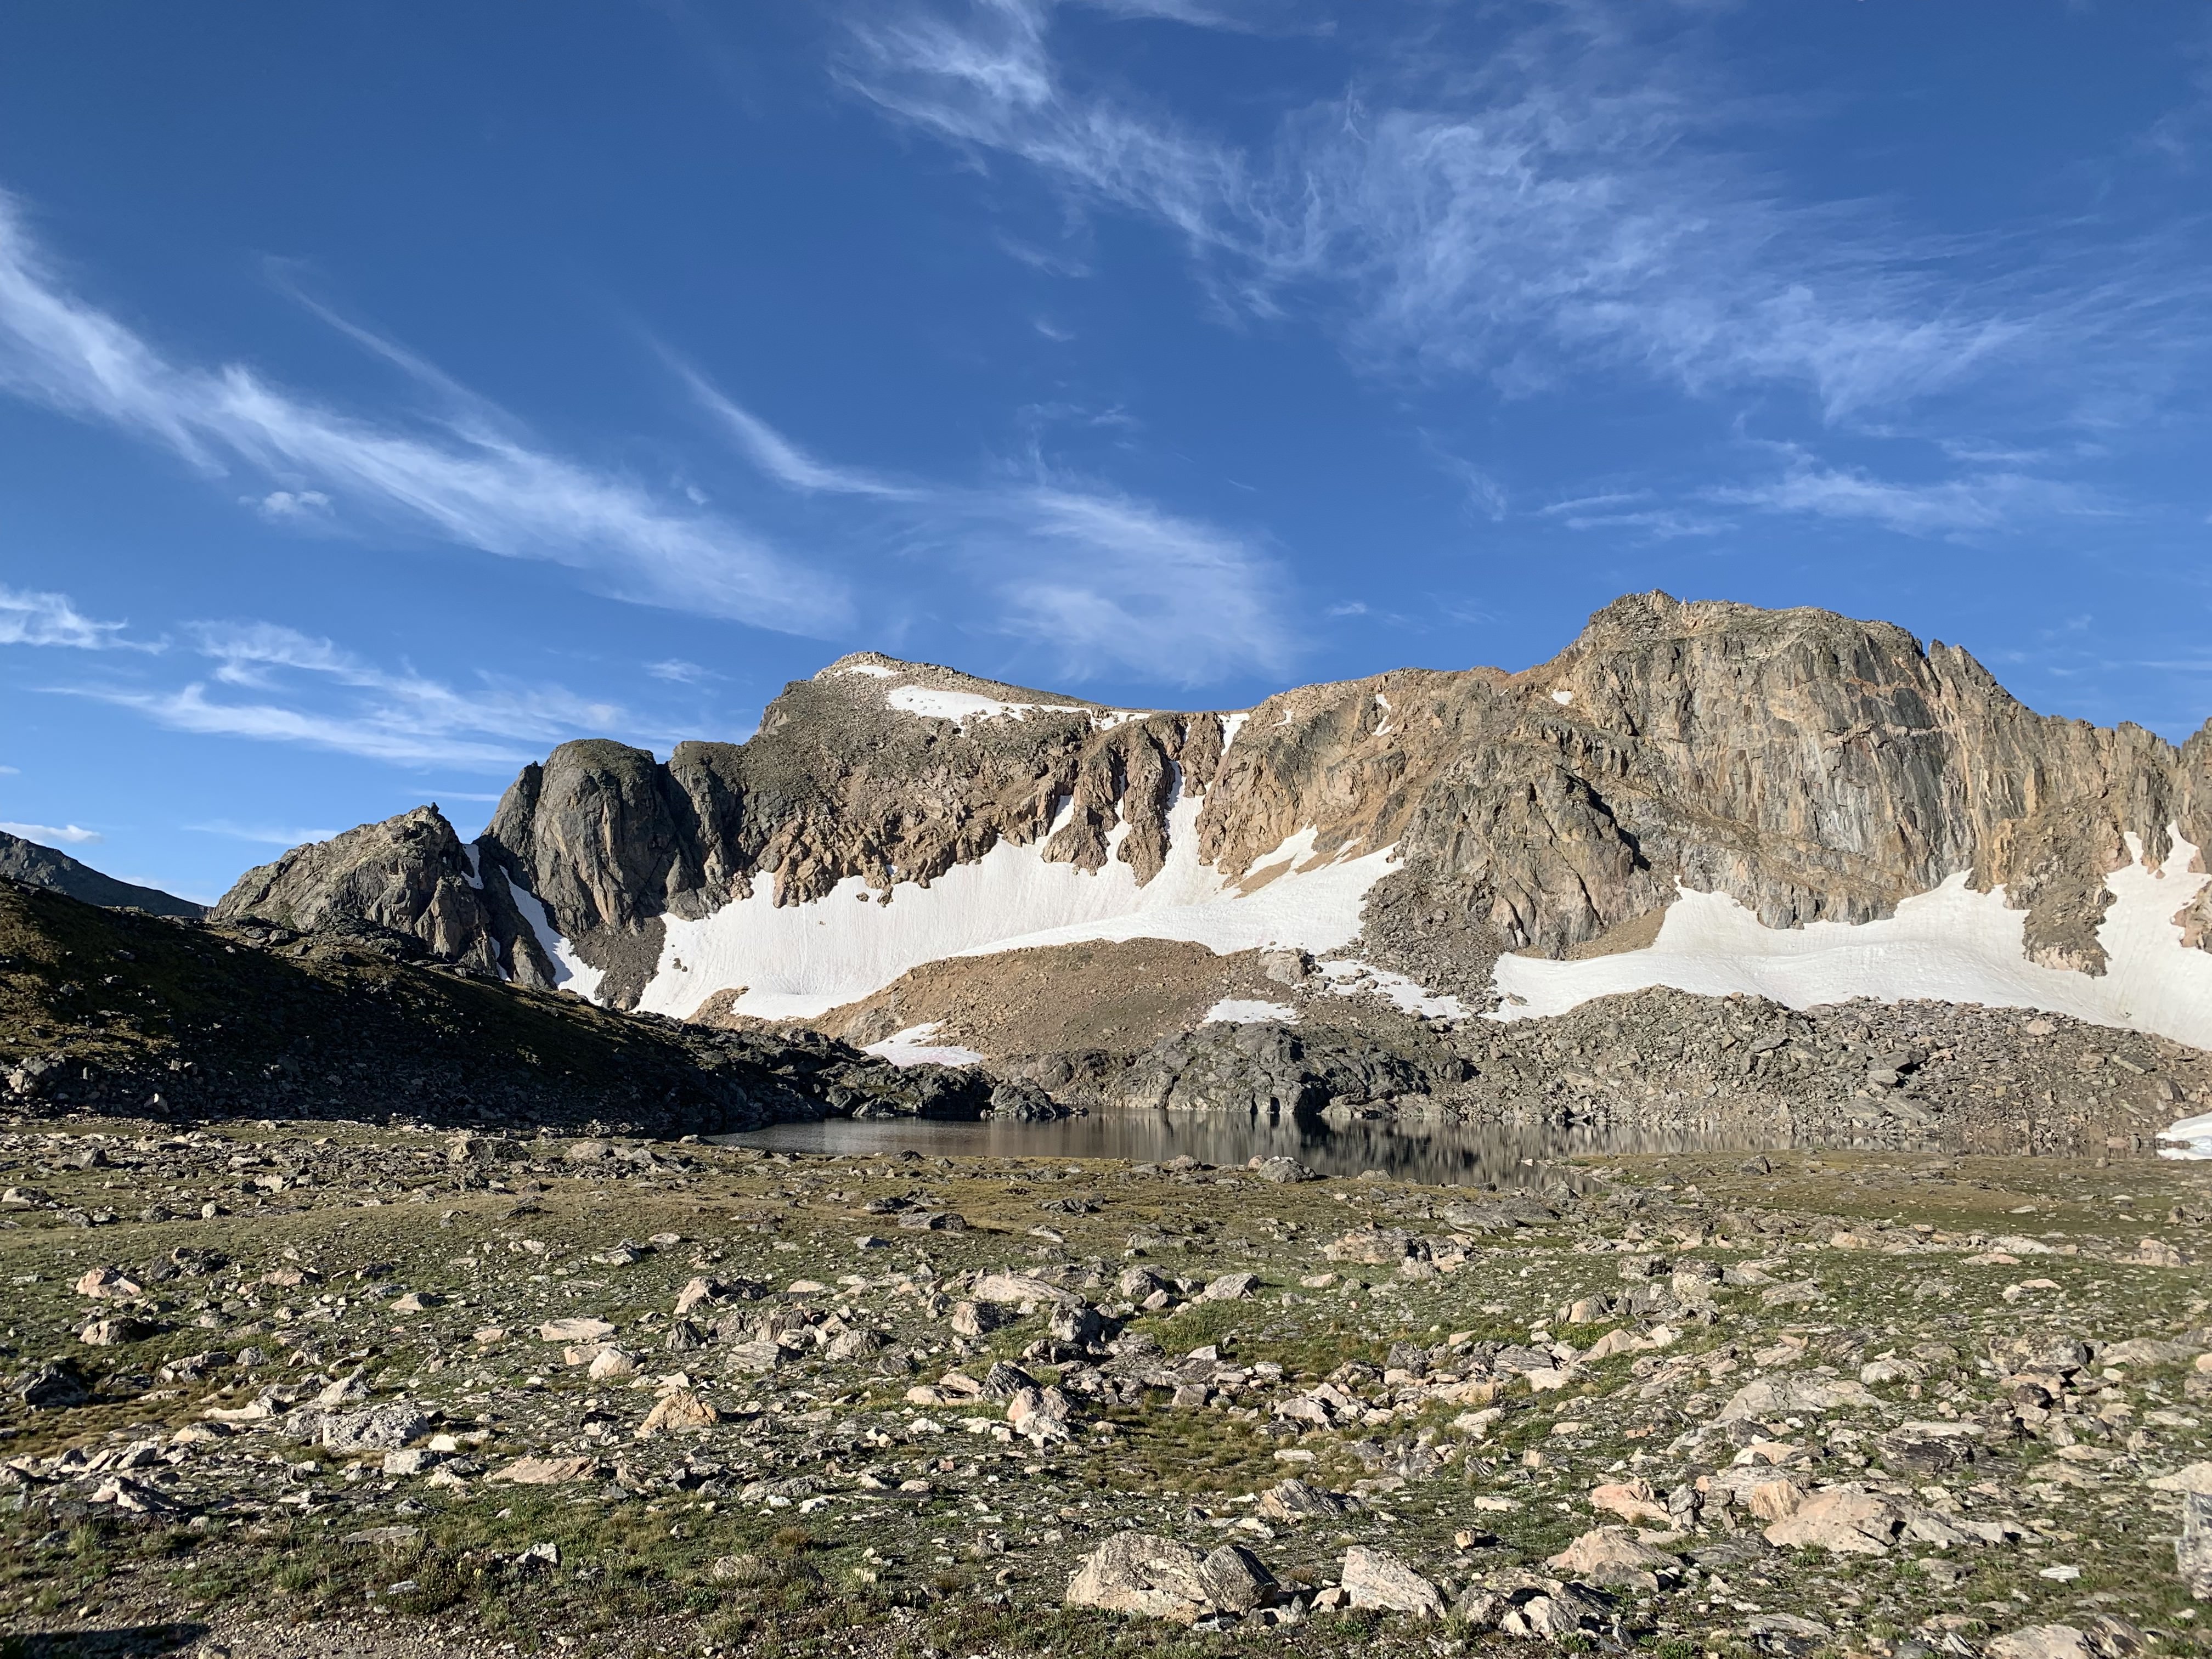 Just over Arapaho Pass, an epic high camp could be made at this lake given a calm evening.